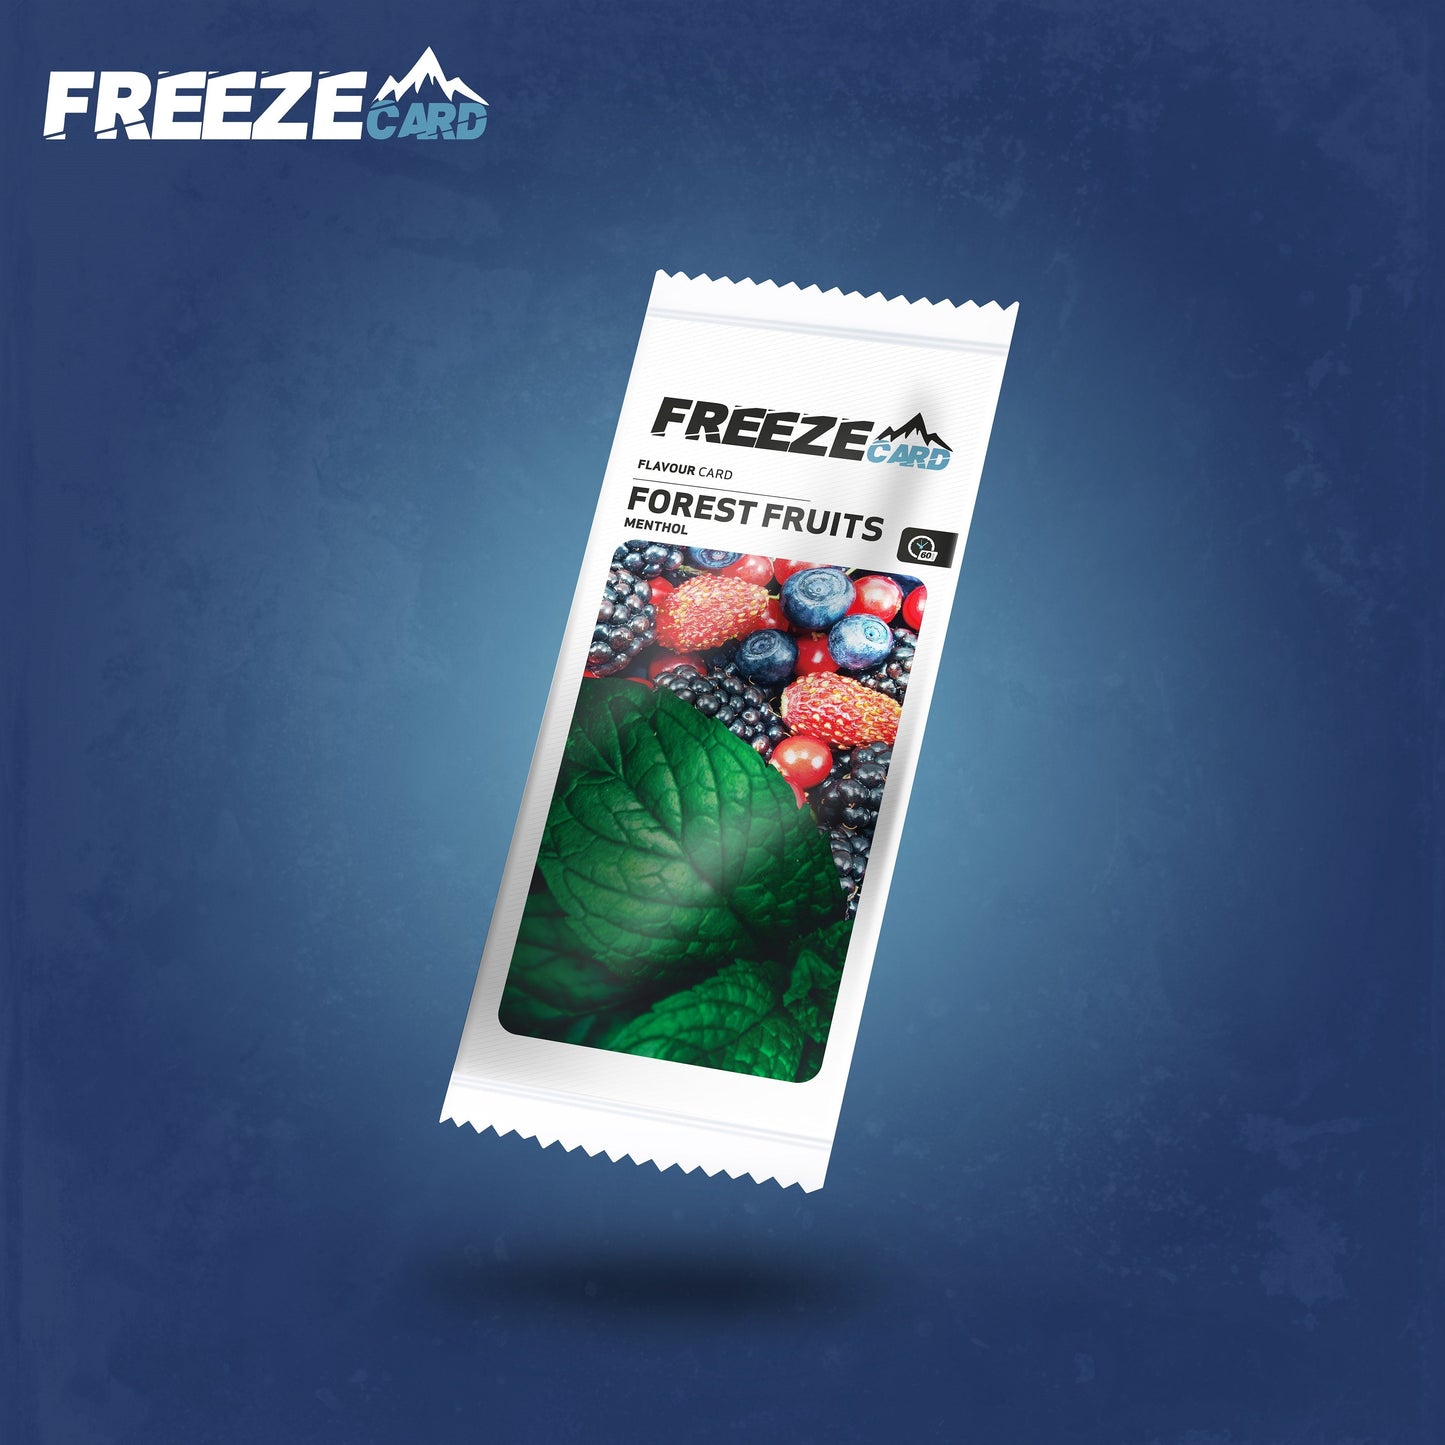 Freezecard Forest Fruits Flavour Card